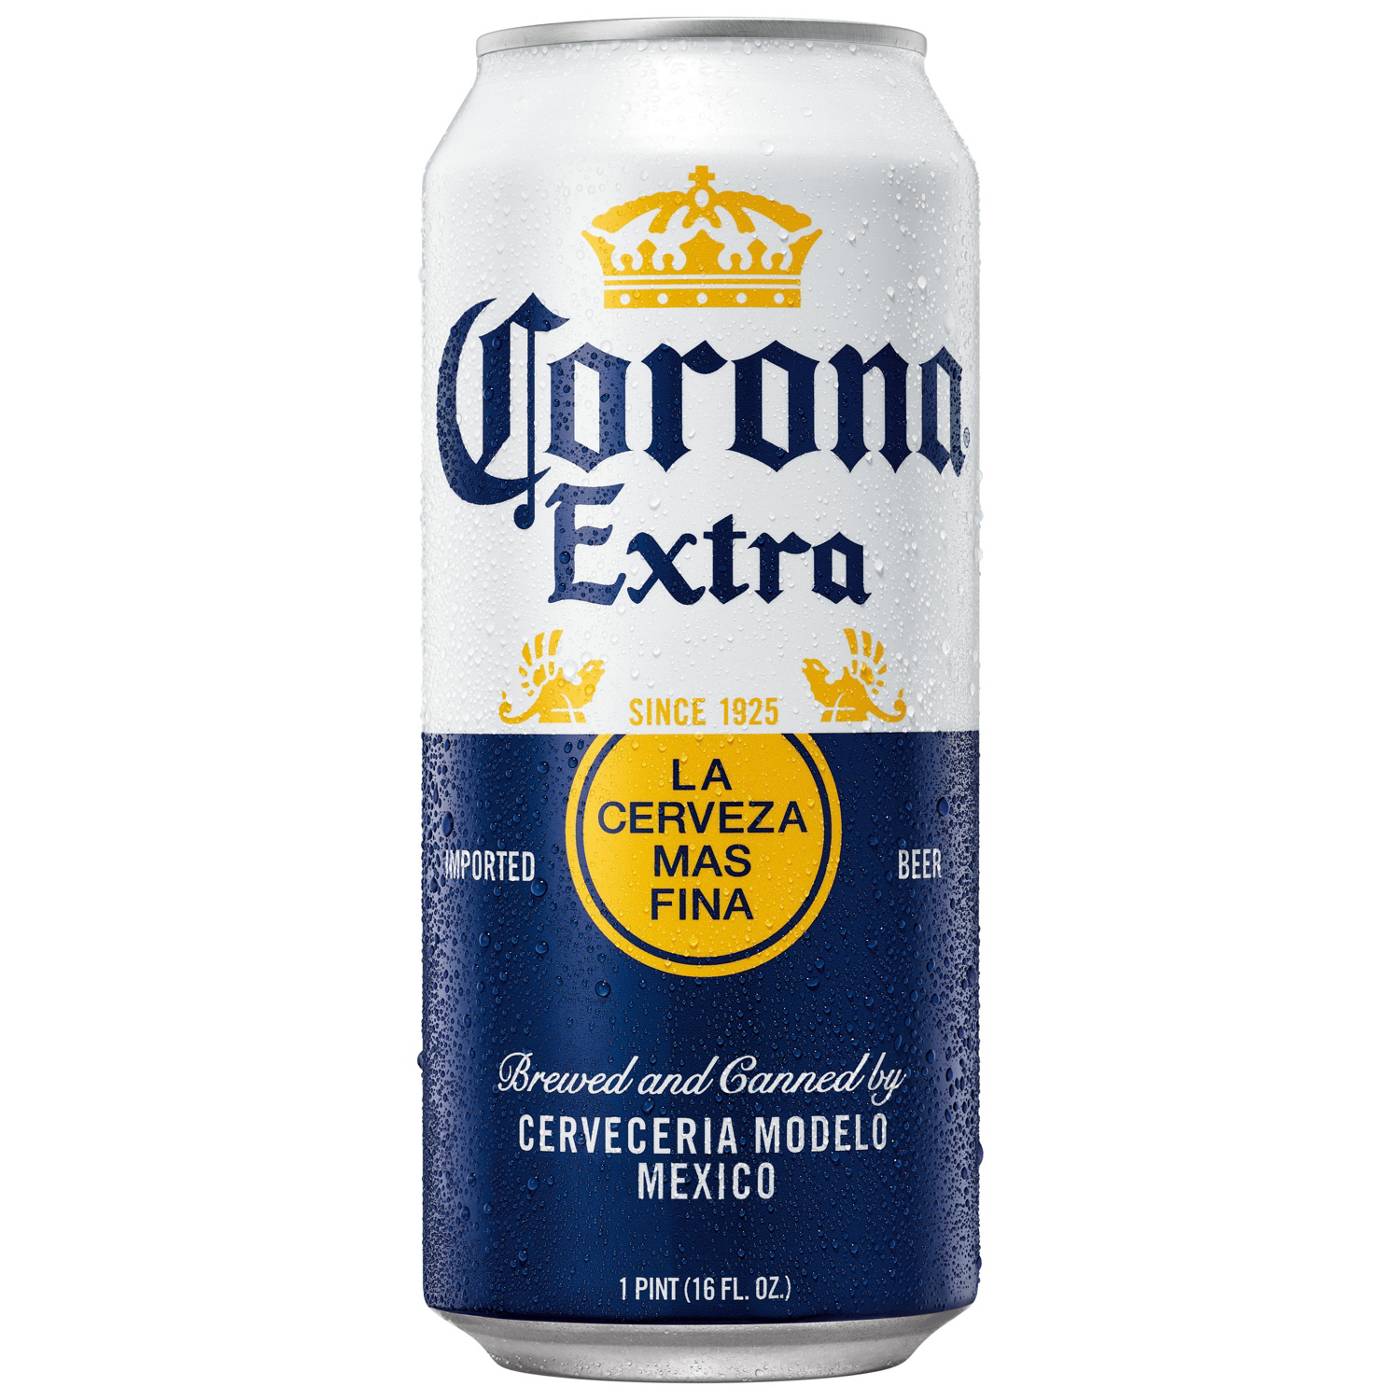 Corona Extra Mexican Lager Import Beer 16 oz Cans, 4 pk; image 9 of 11